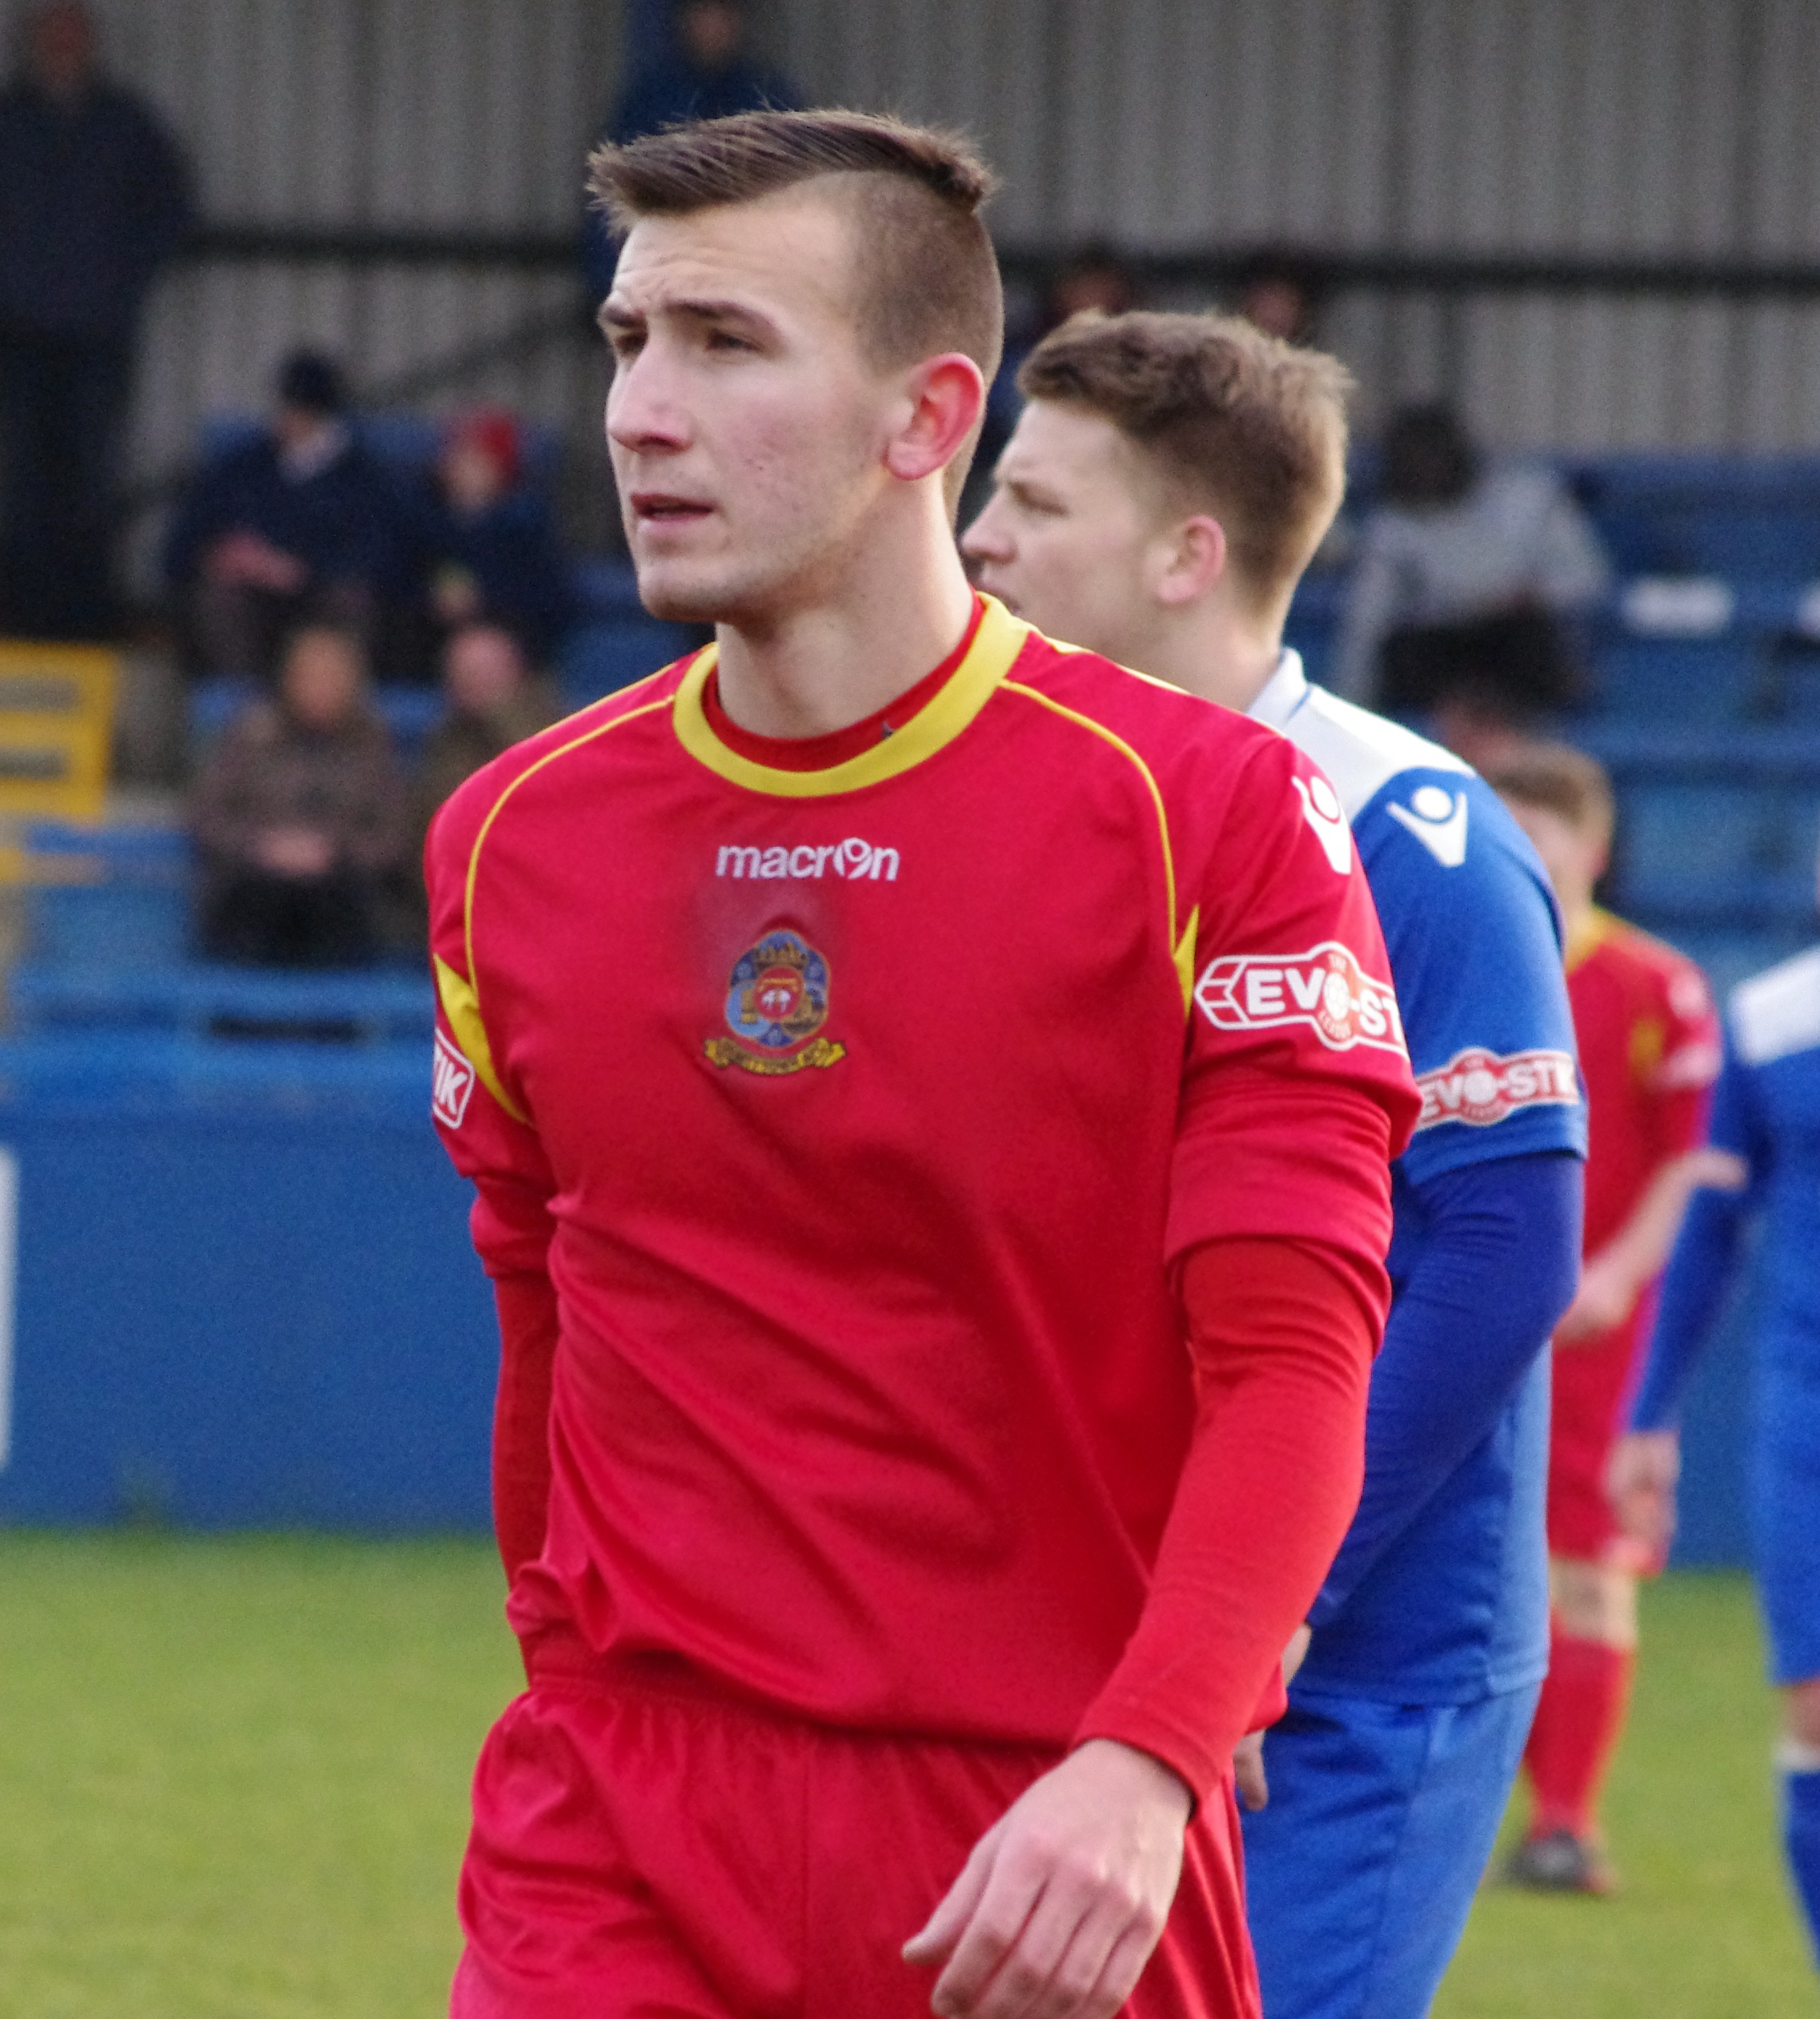 Craig Elliott was "disappointed" to lose striker Calum Ward to Tadcaster Albion this week